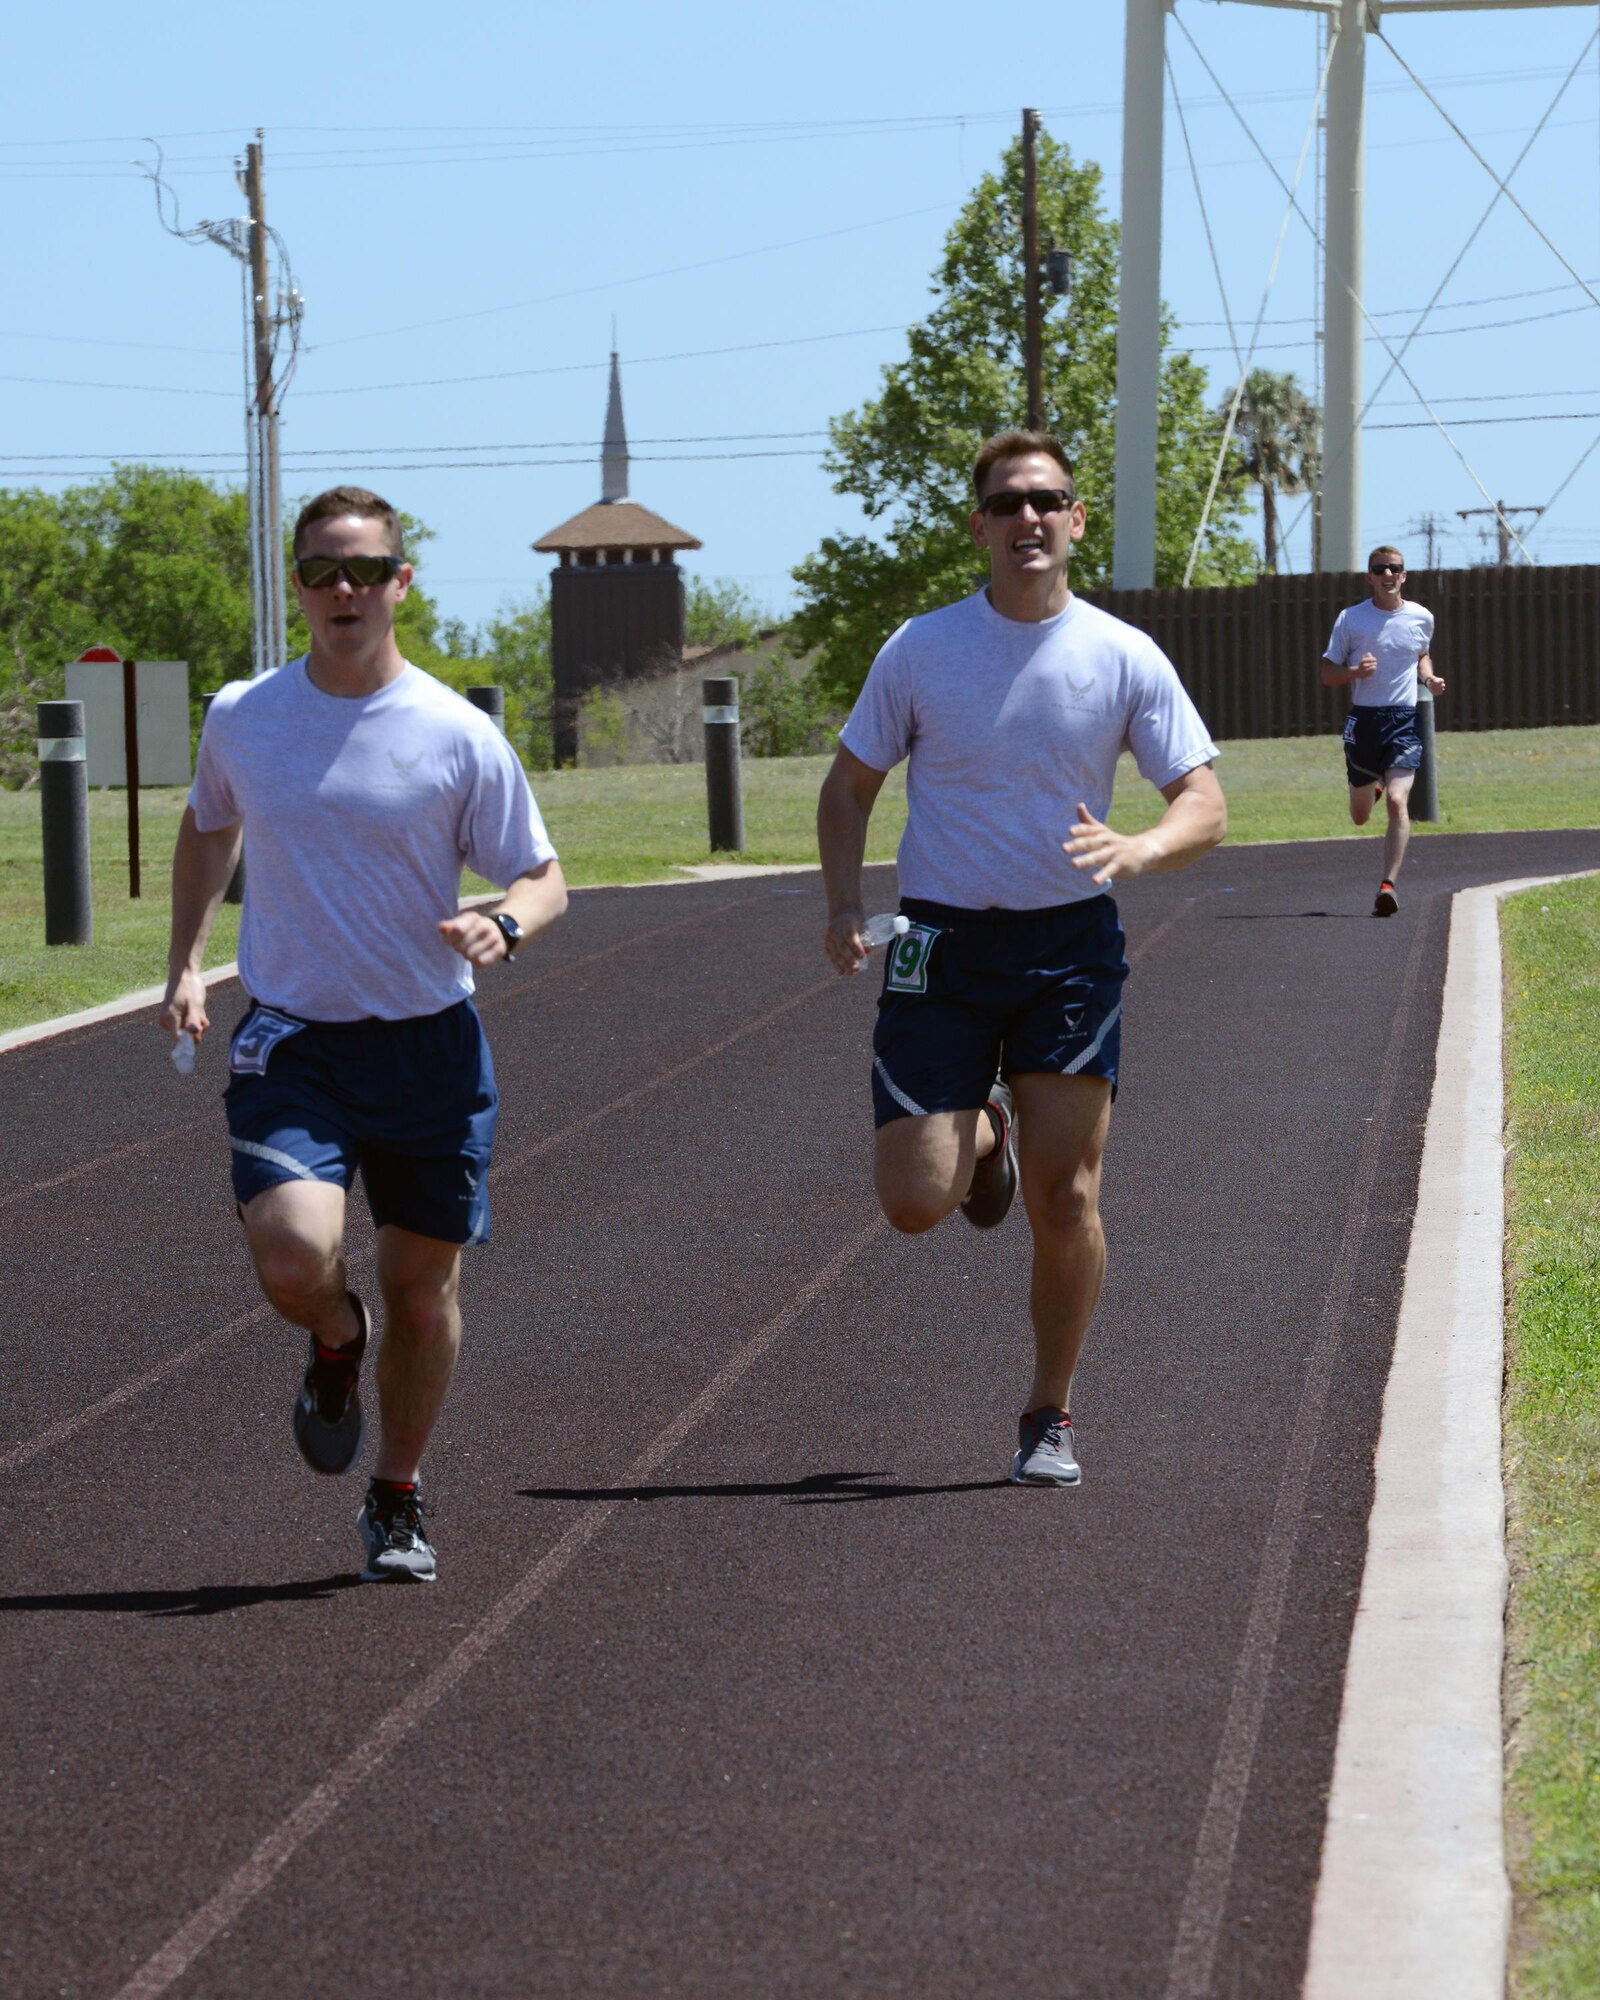 2nd Lt. Daniel Corriero, 47th Student Squadron awaiting pilot training, left, and 2nd Lt. Austin Foster, 47th STUS awaiting pilot training, right, run on the track at Laughlin Air Force Base, Texas, April 5, 2016. During the Warrior Games, multiple relays were held to help improve cardio and endurance. (U.S. Air Force photo by Senior Airman Jimmie D. Pike)